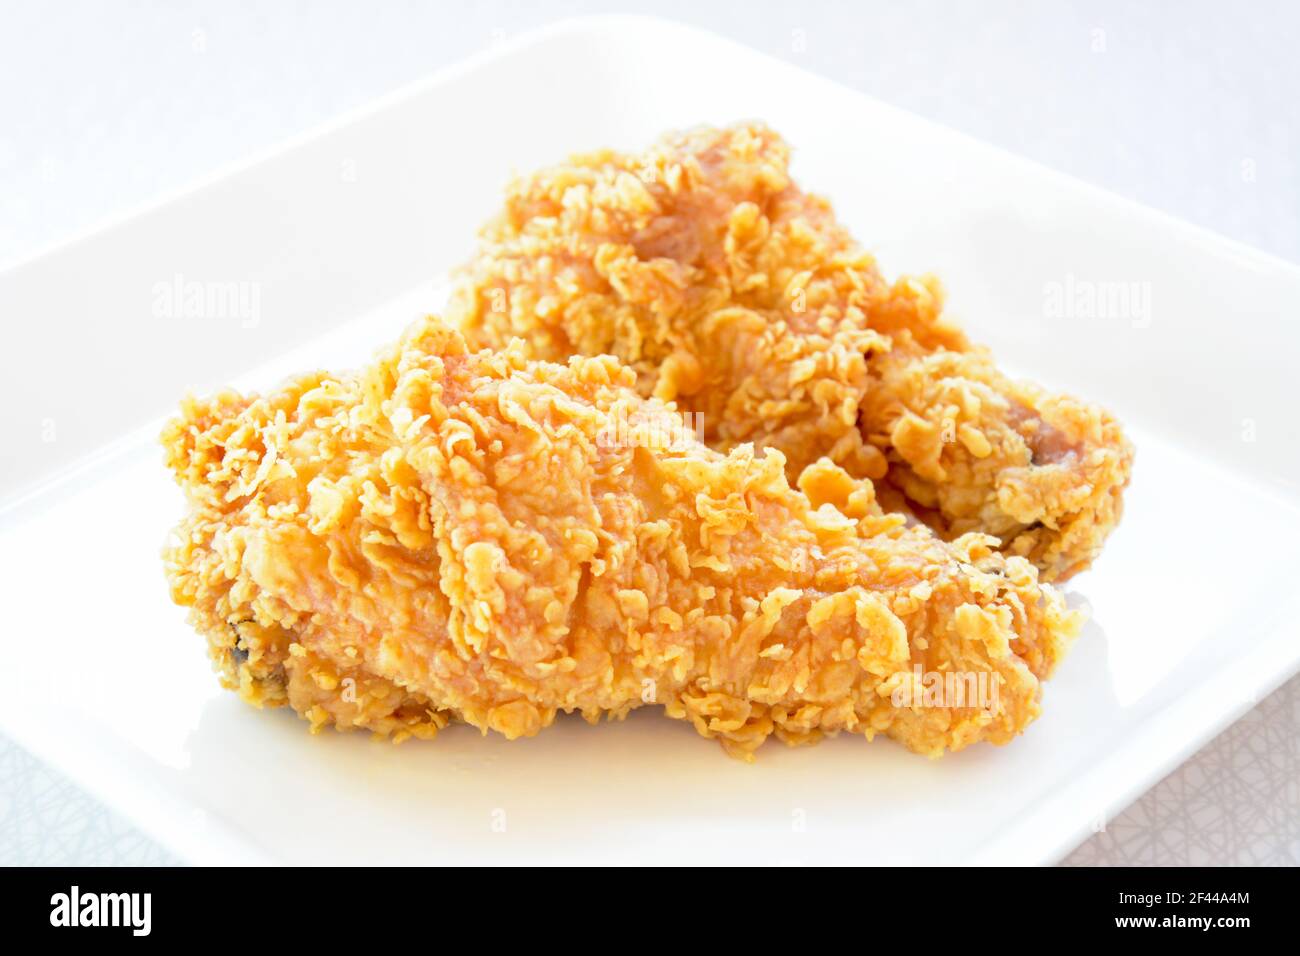 Fried chicken legs on a white plate Stock Photo